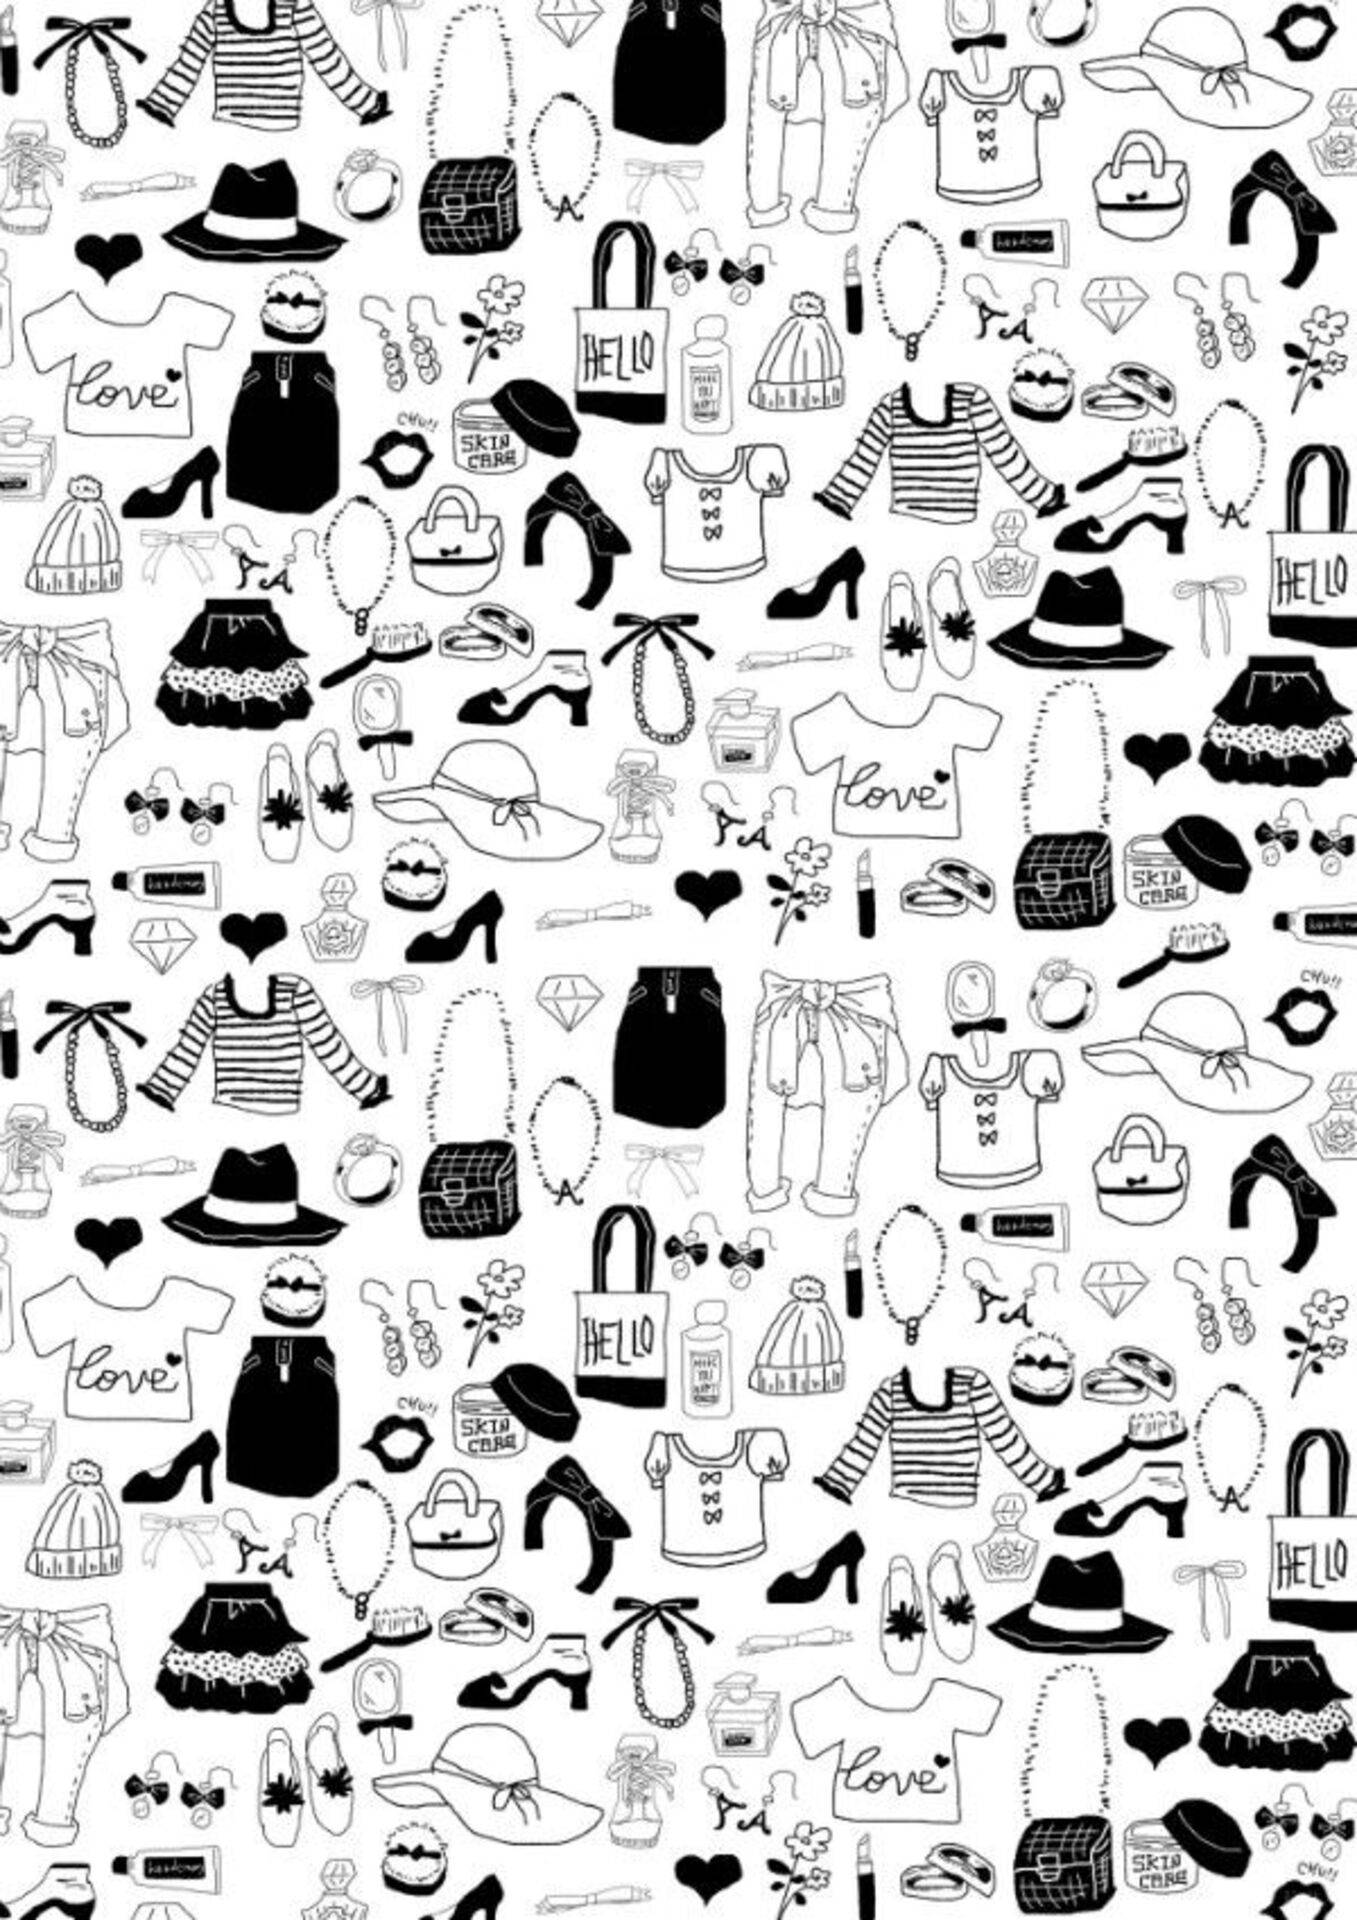 Make a bold statement in black and white! Wallpaper